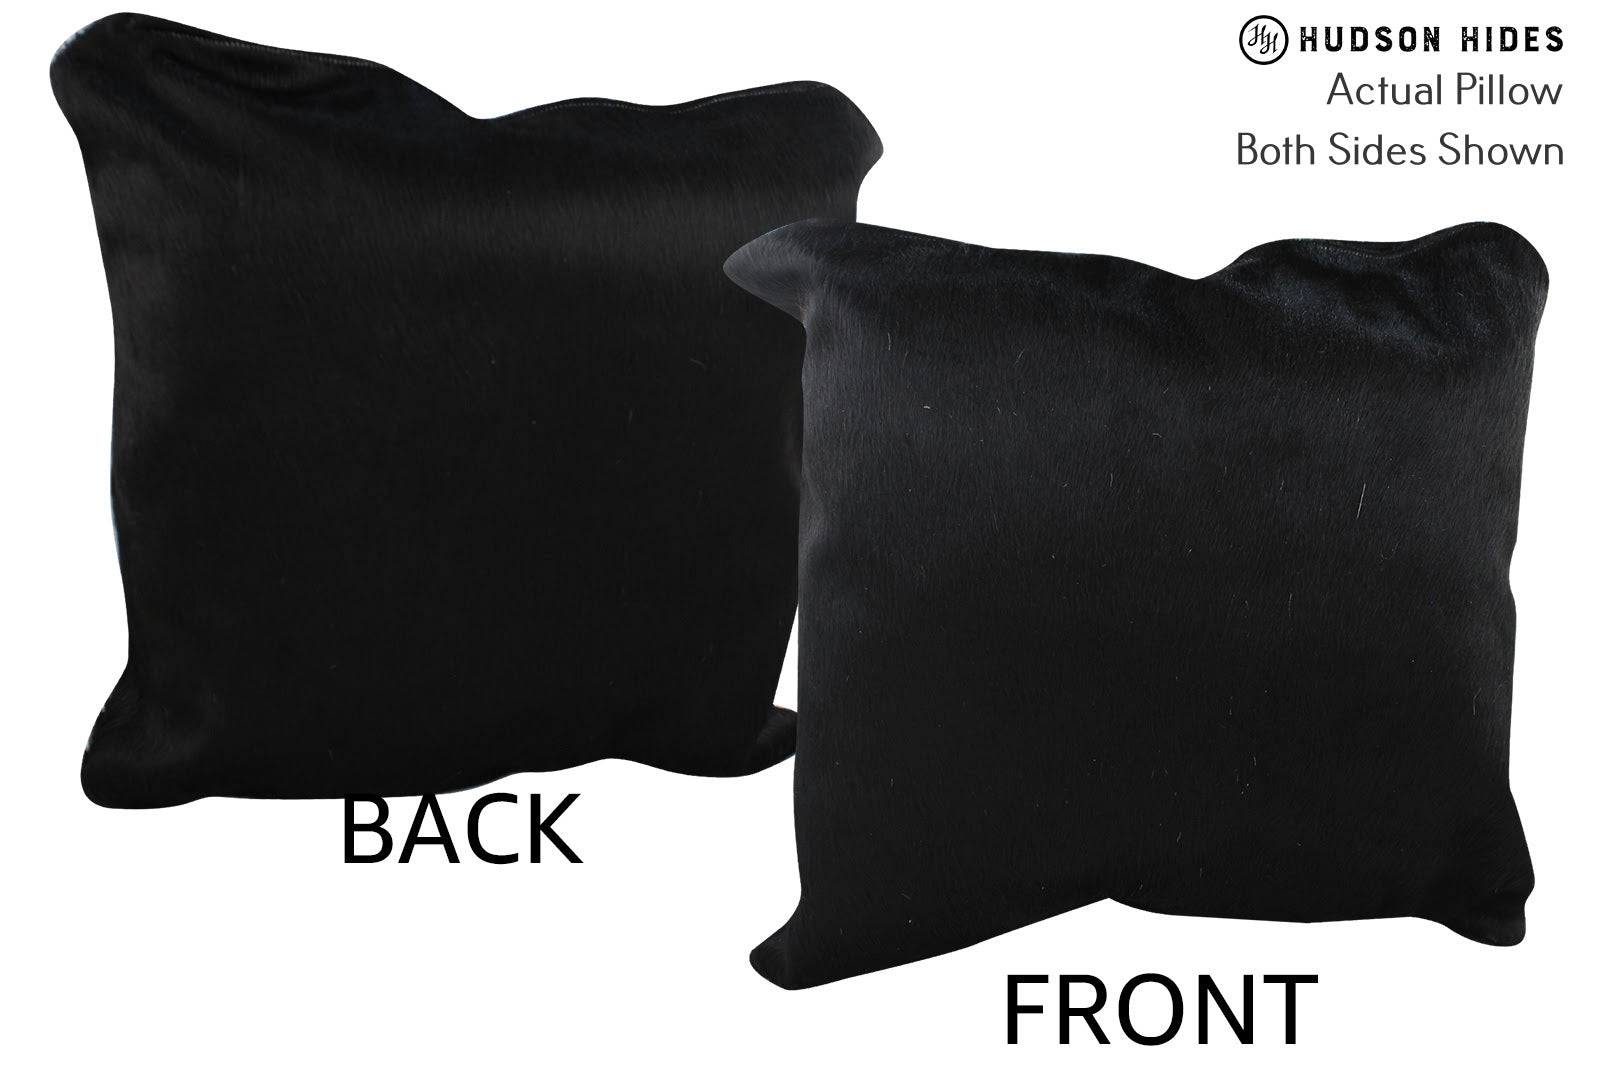 Solid Black Cowhide Pillow #75534